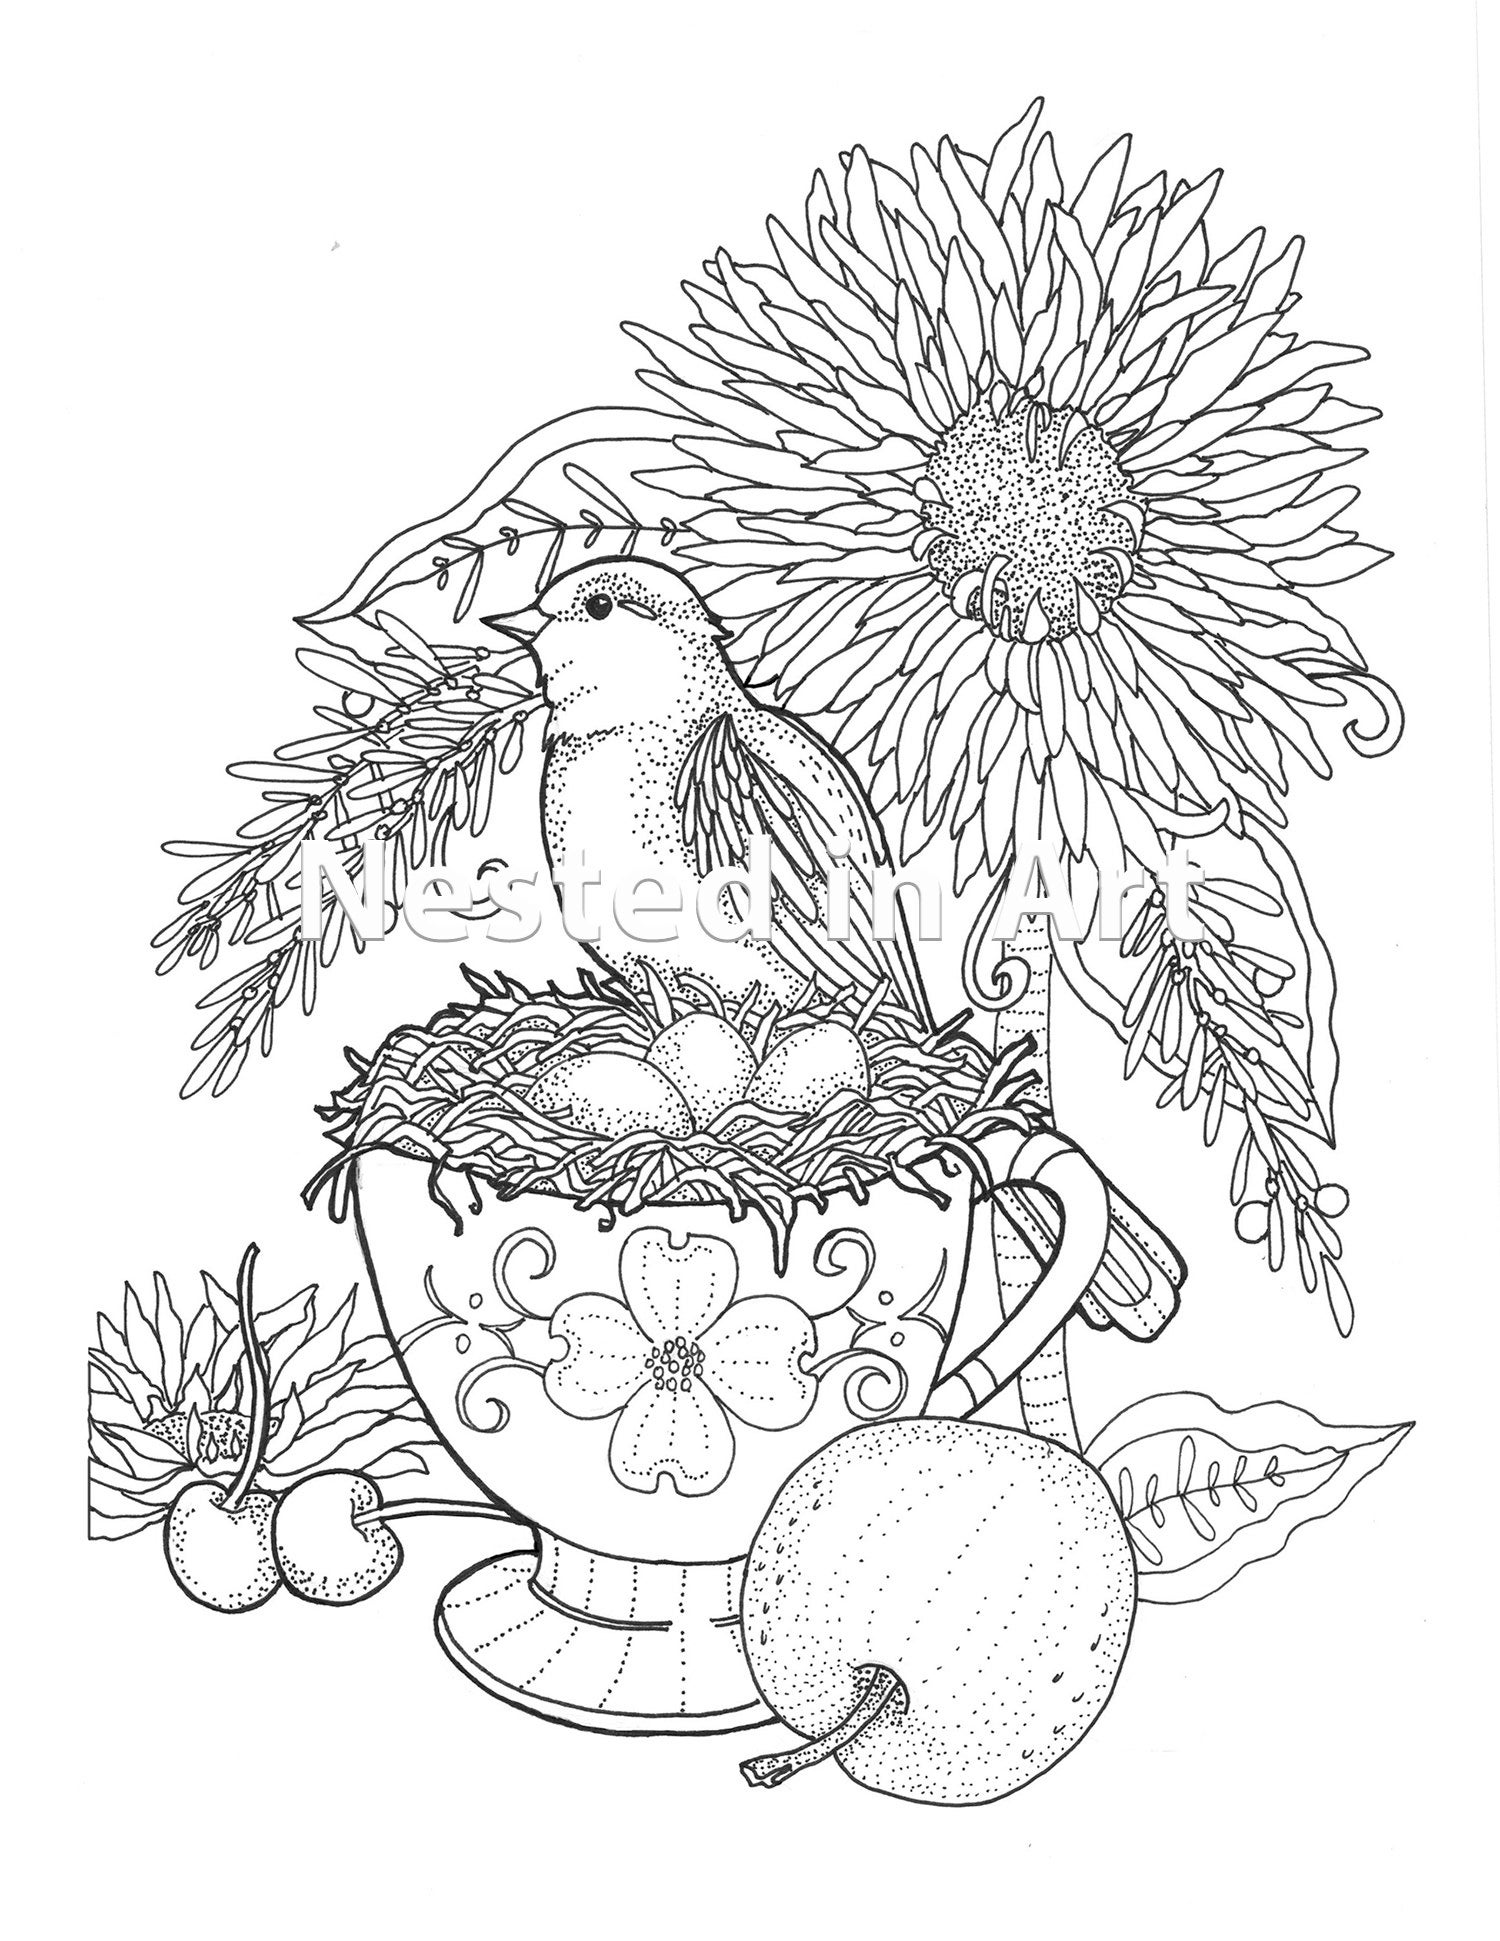 29 Coloring Pages for Gel Pens ideas  coloring pages, coloring book pages,  adult coloring pages